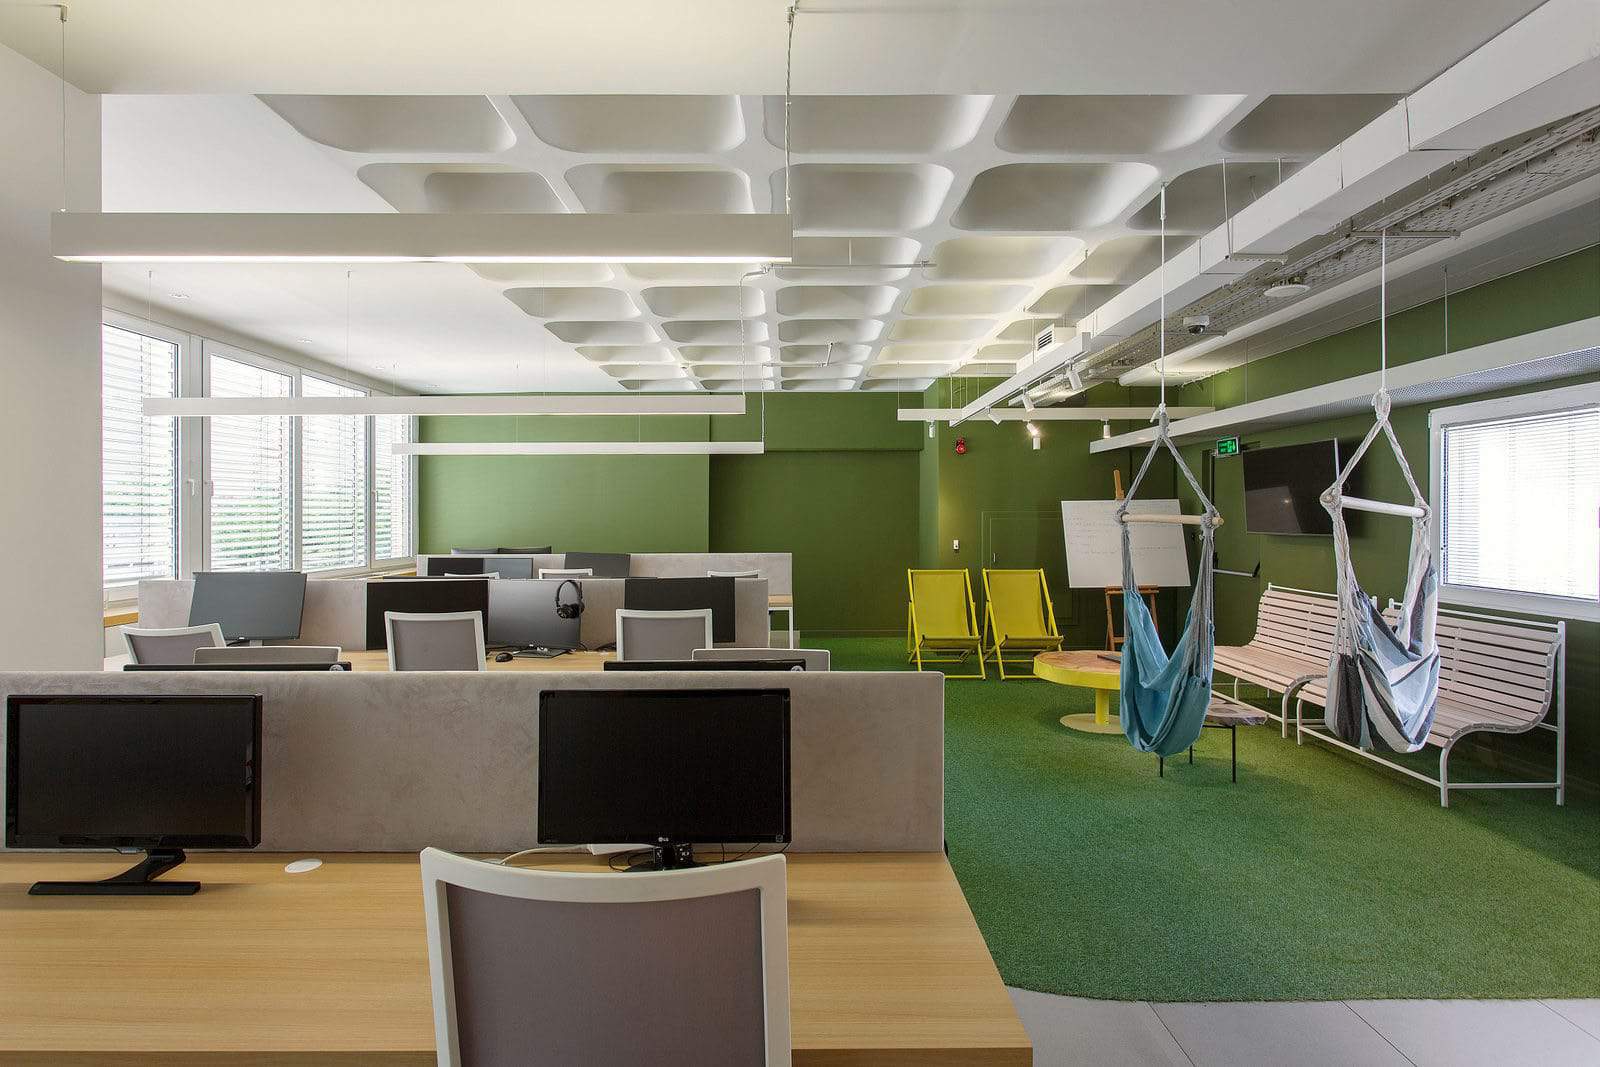 Ceiling suspended hammocks and artificial grass floor